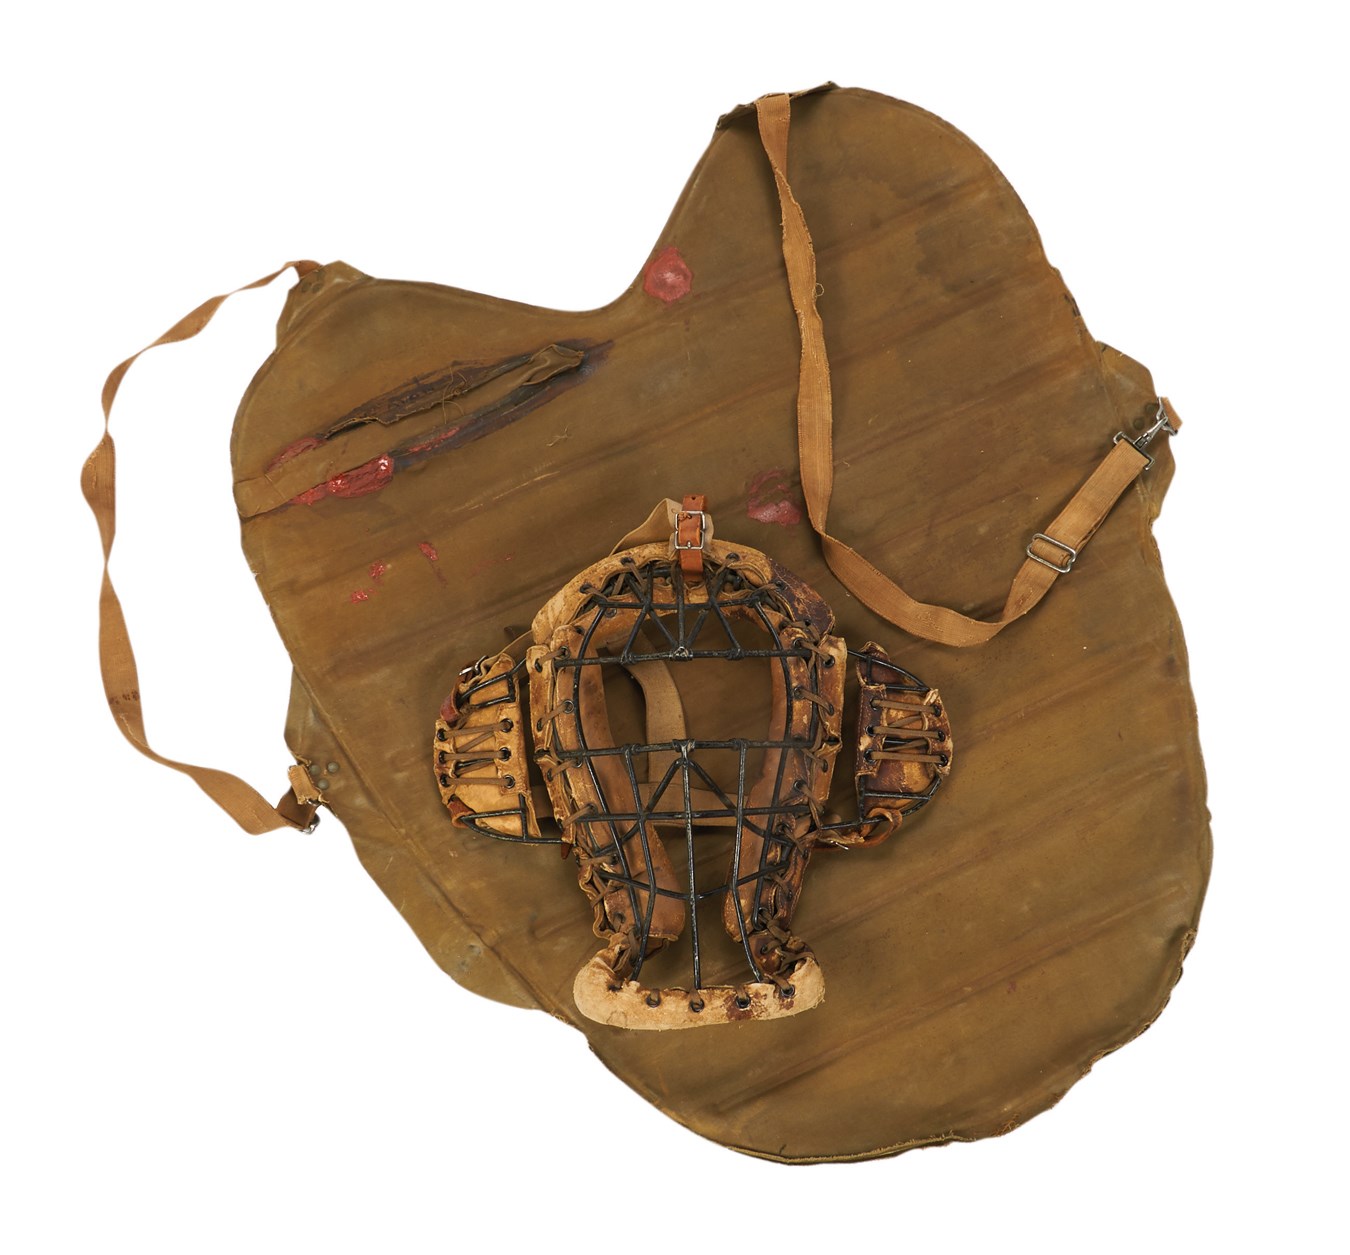 - Very Rare Circa 1910s Umpire's Mask and Inflatable Chest Protector